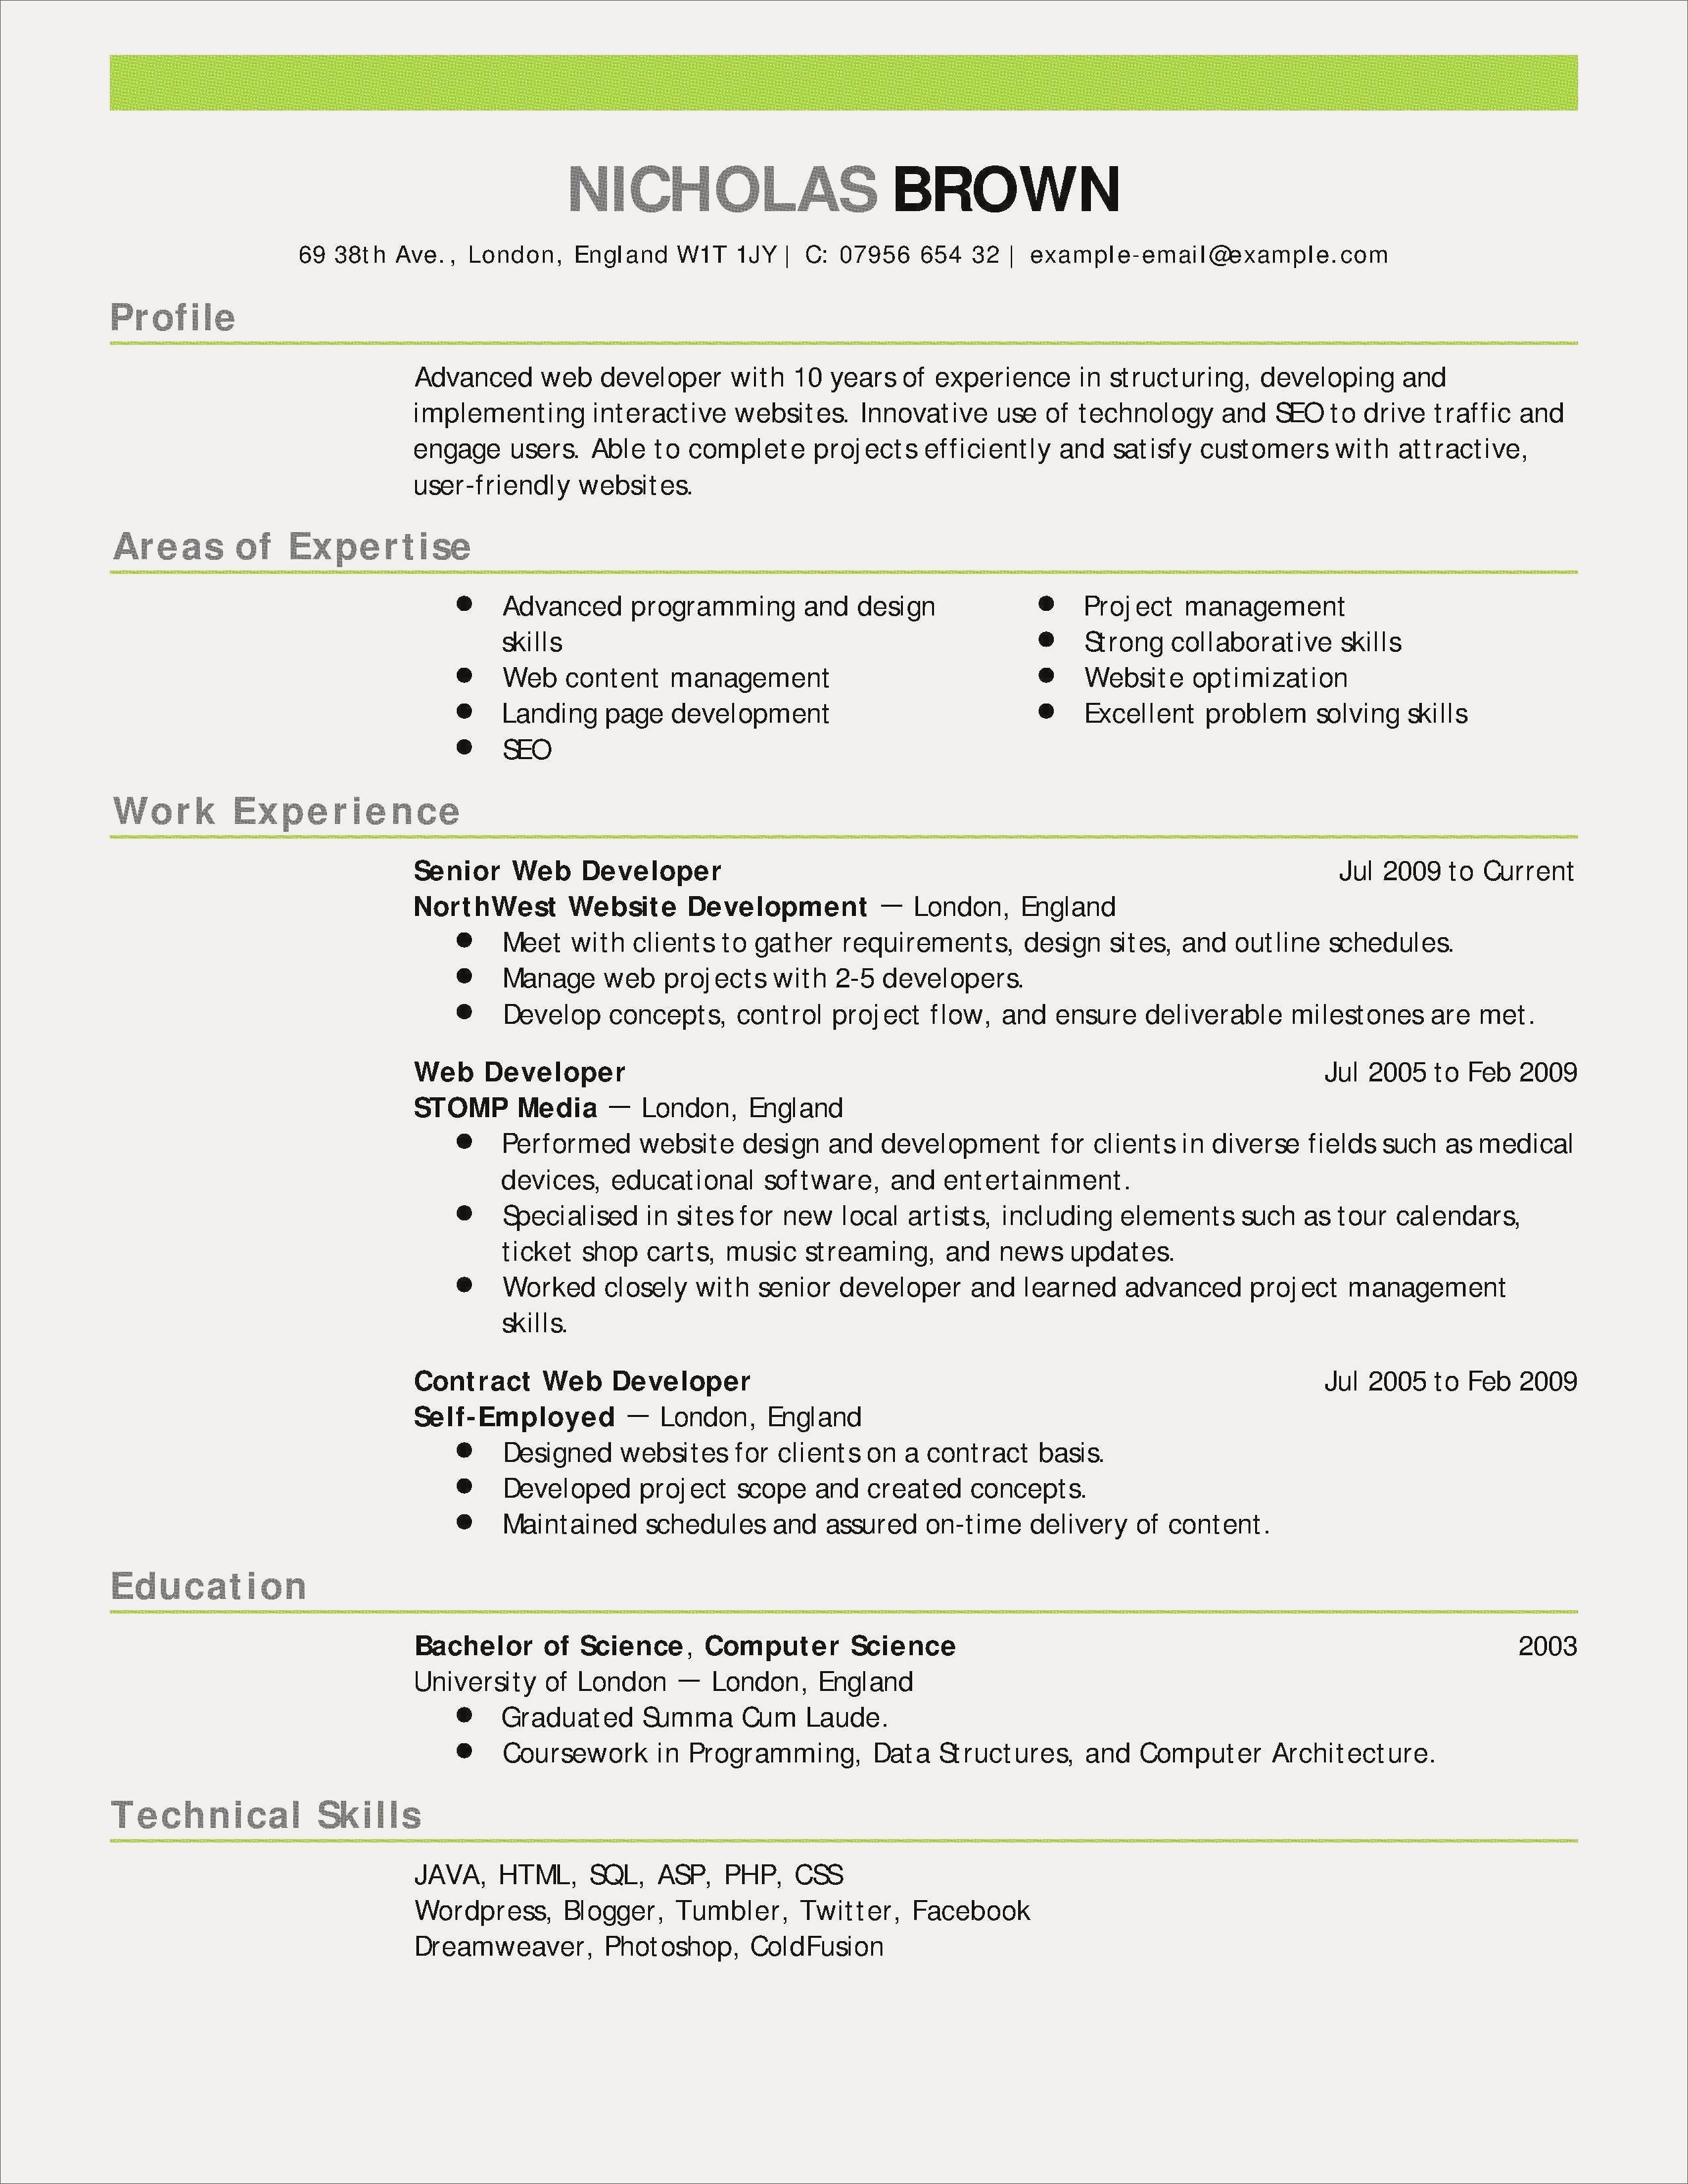 Sales Resume Examples Hairstyles Professional Resume Examples Interesting Sales